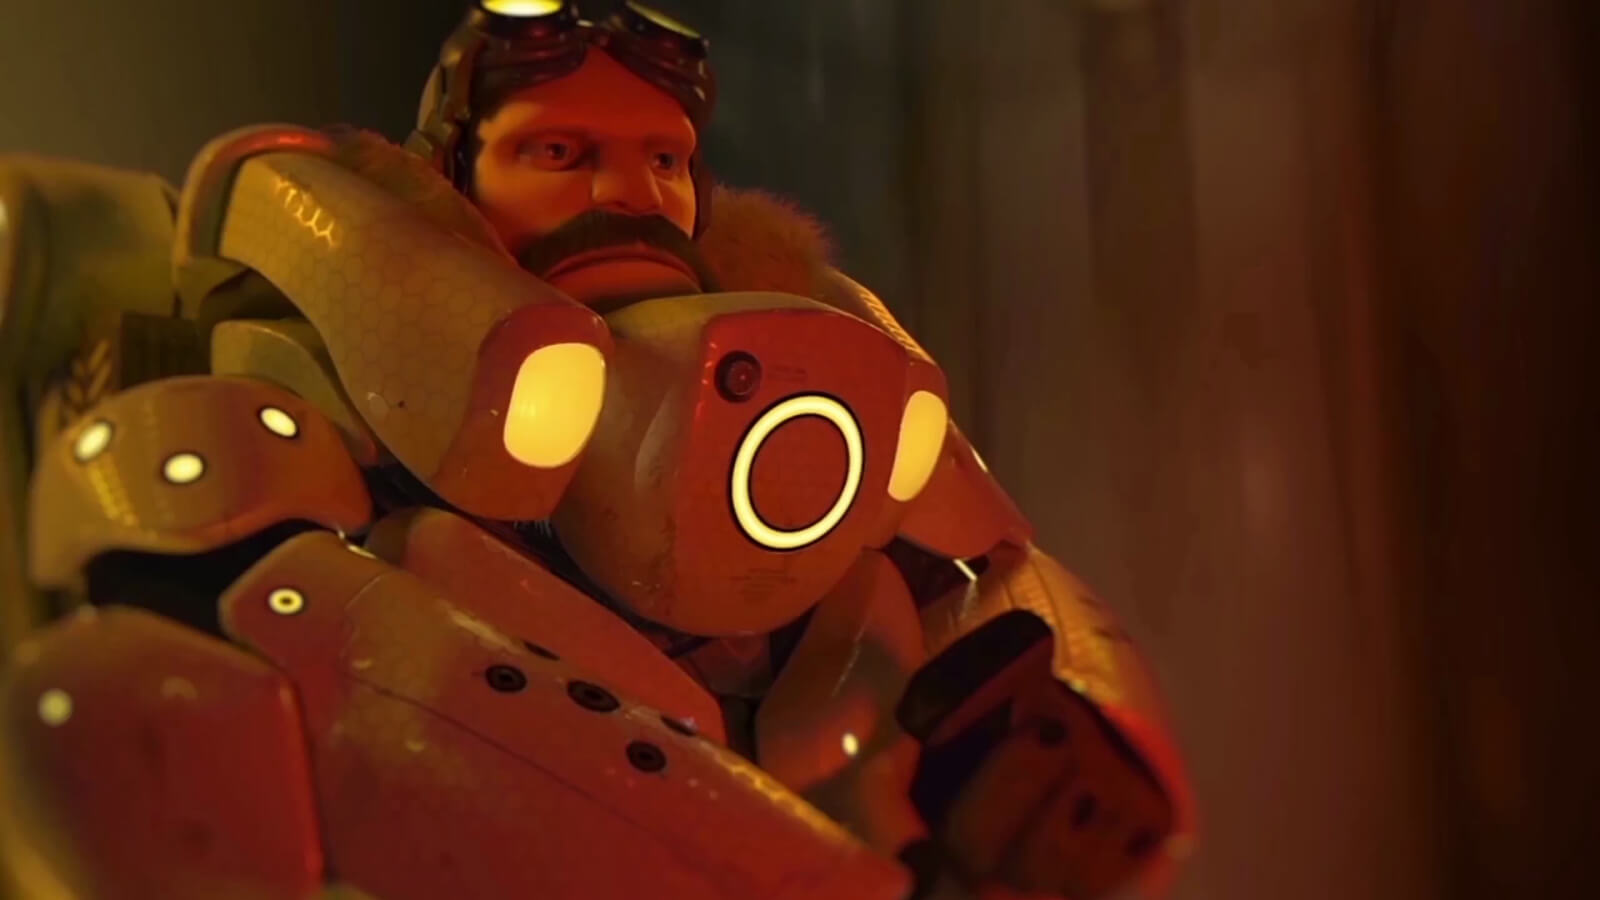 A bearded man wearing goggles and futuristic armor accented with orange lights looks ahead